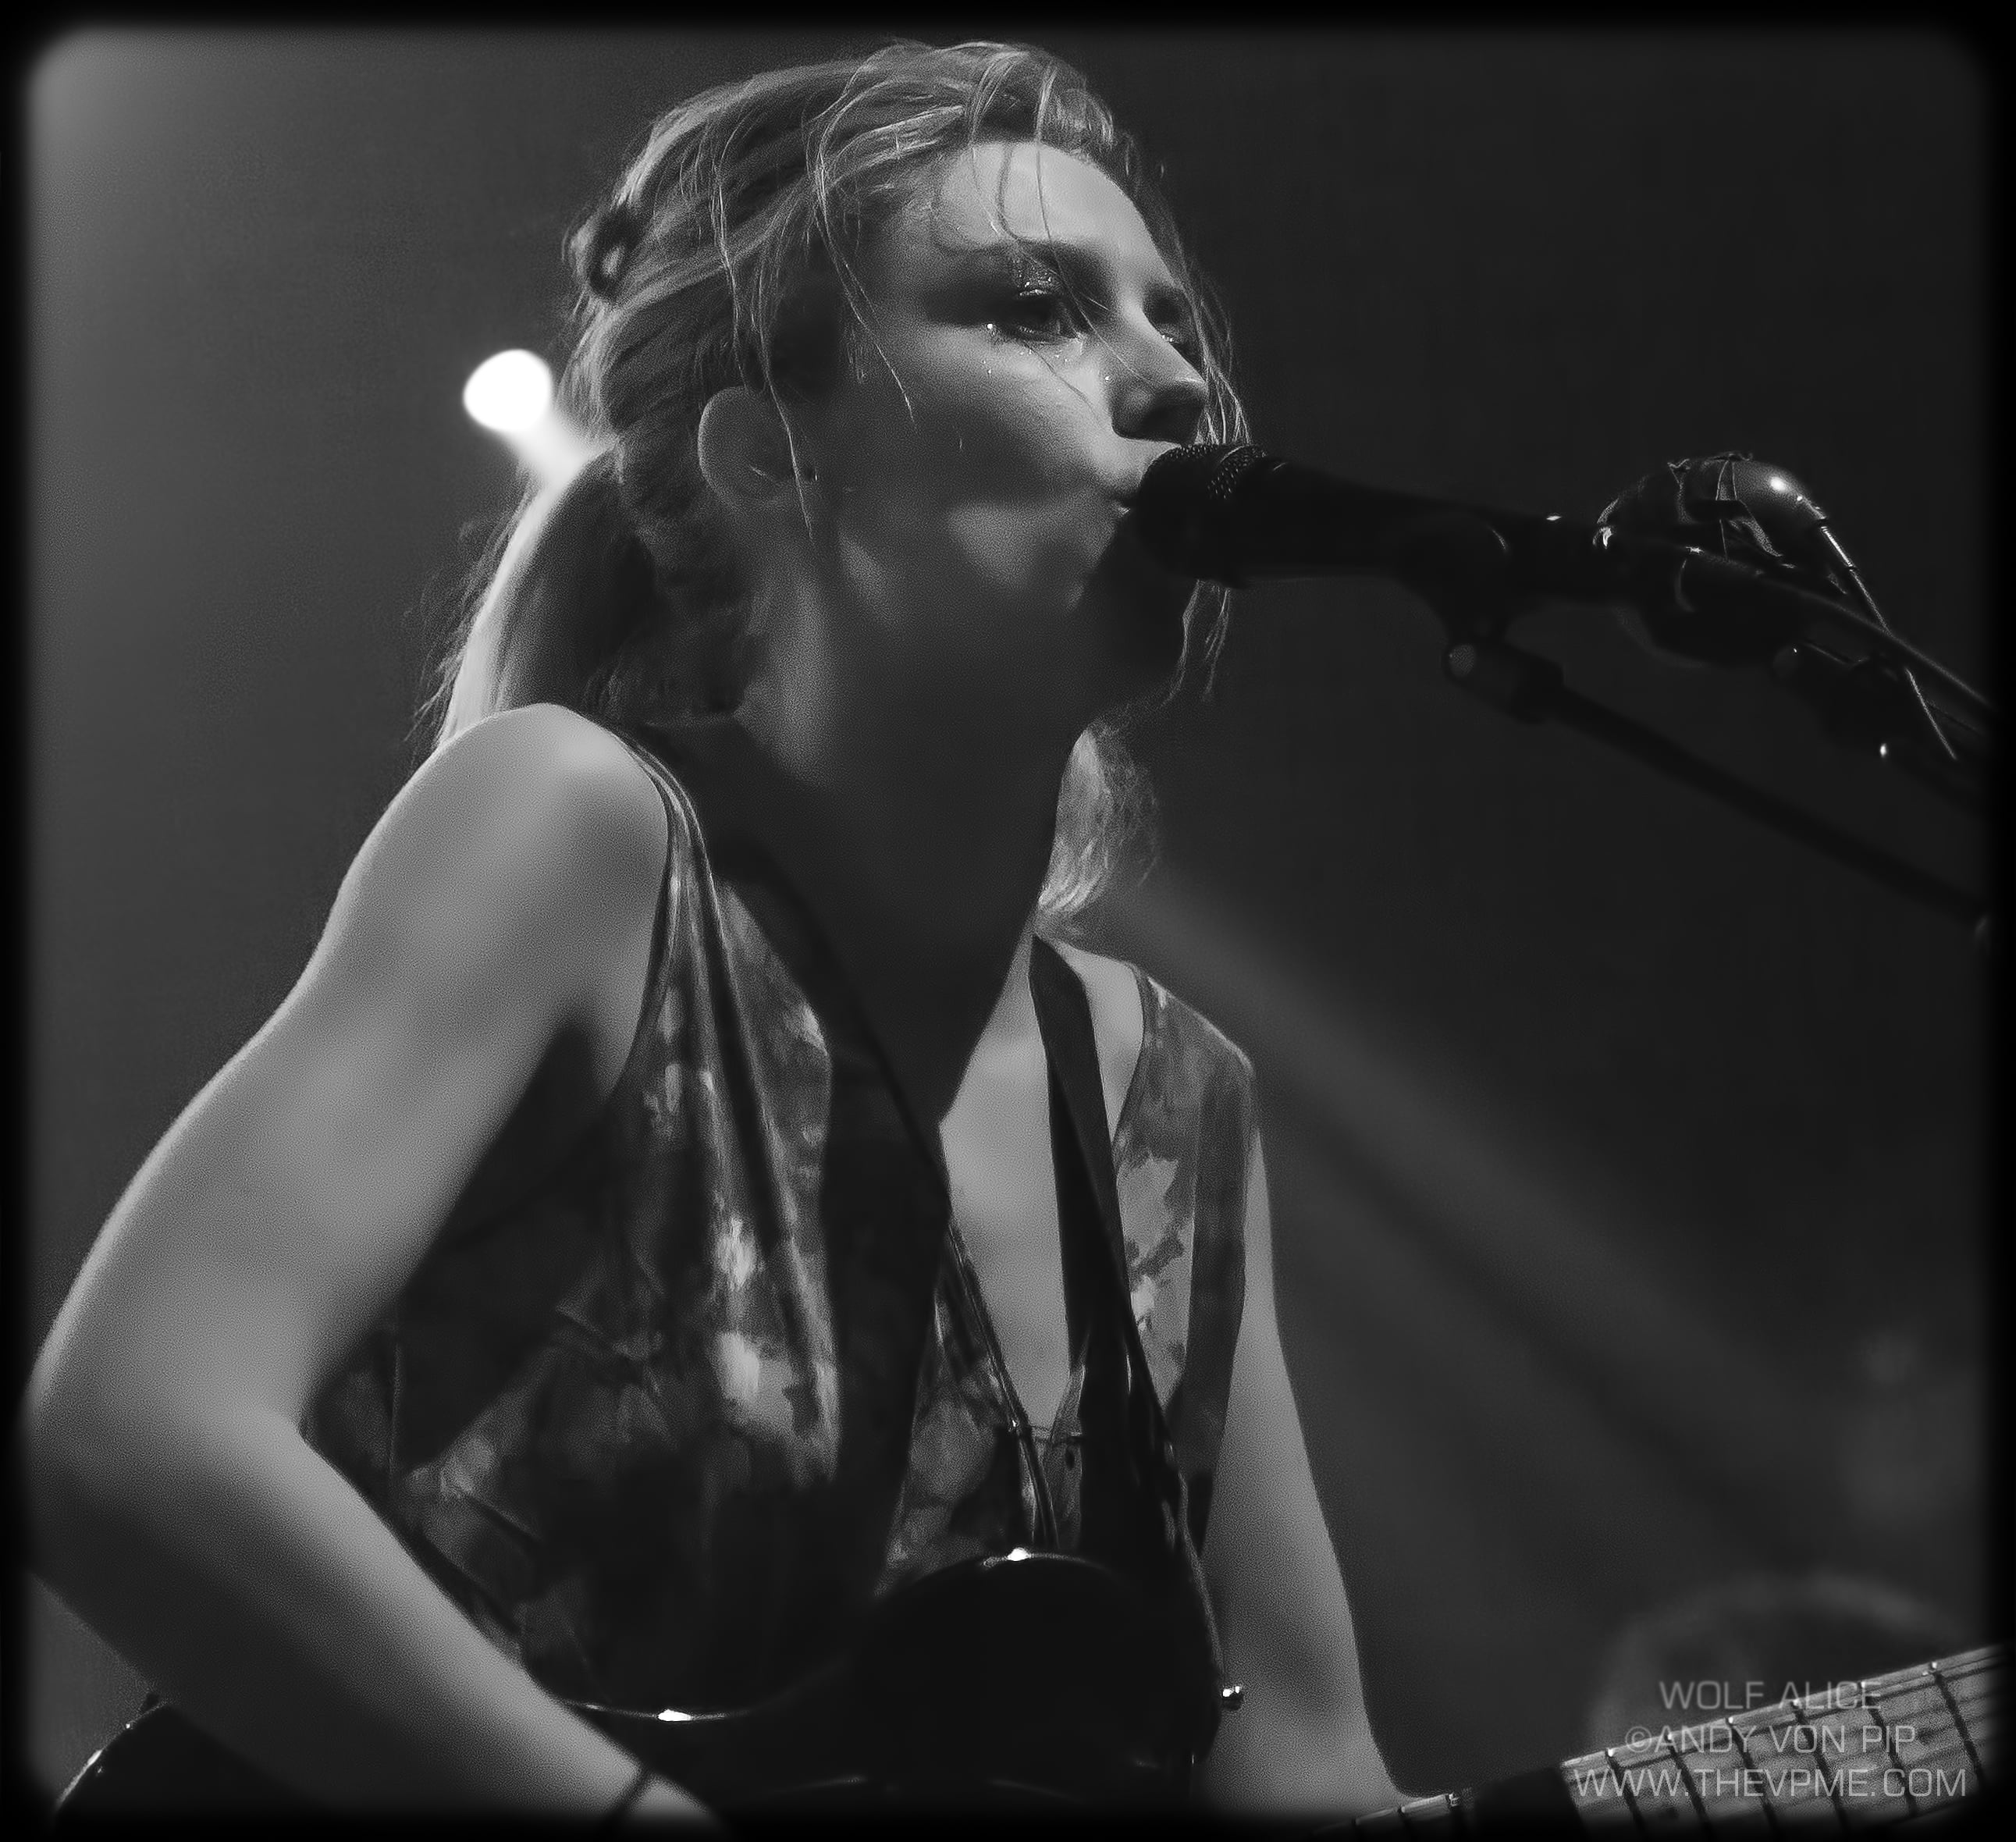 WOLF ALICE - Ellie Rowsell